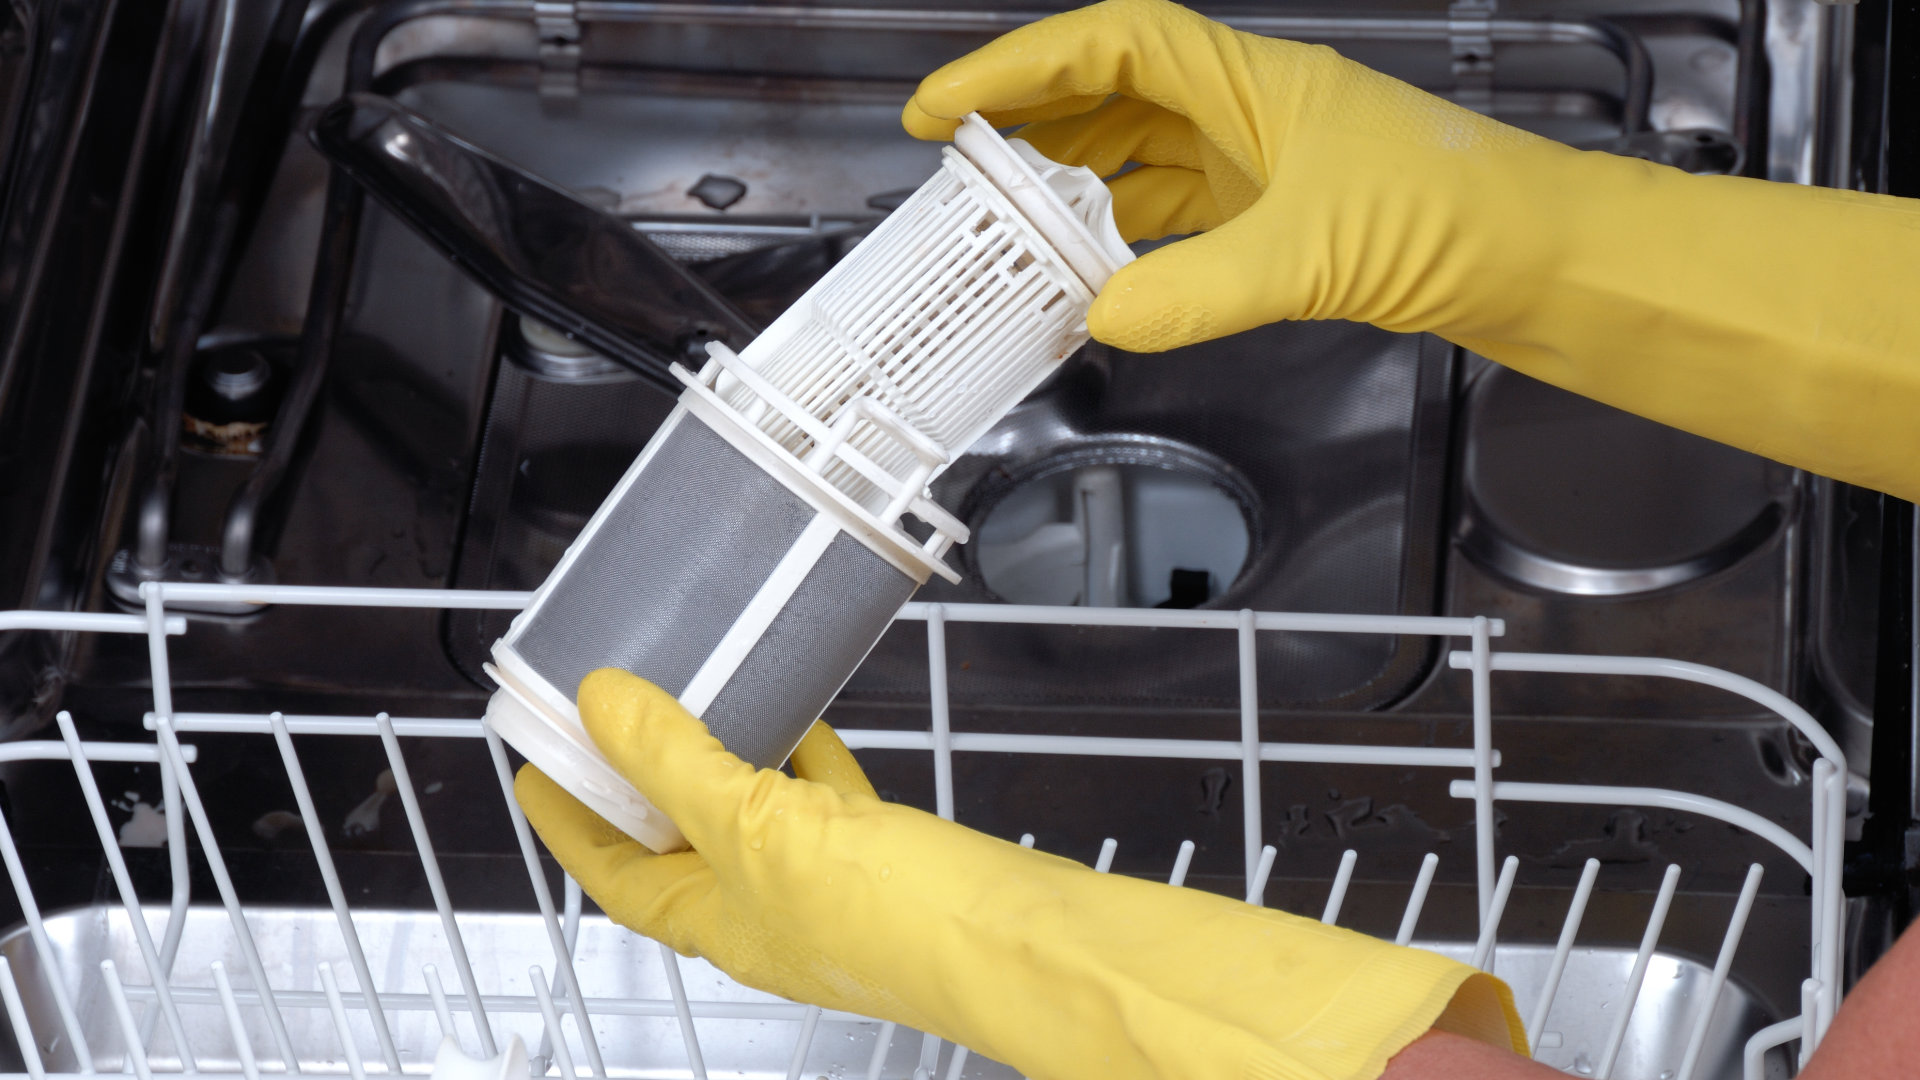 How to Clean a Smelly Dishwasher: 10 Steps - Appliance Express